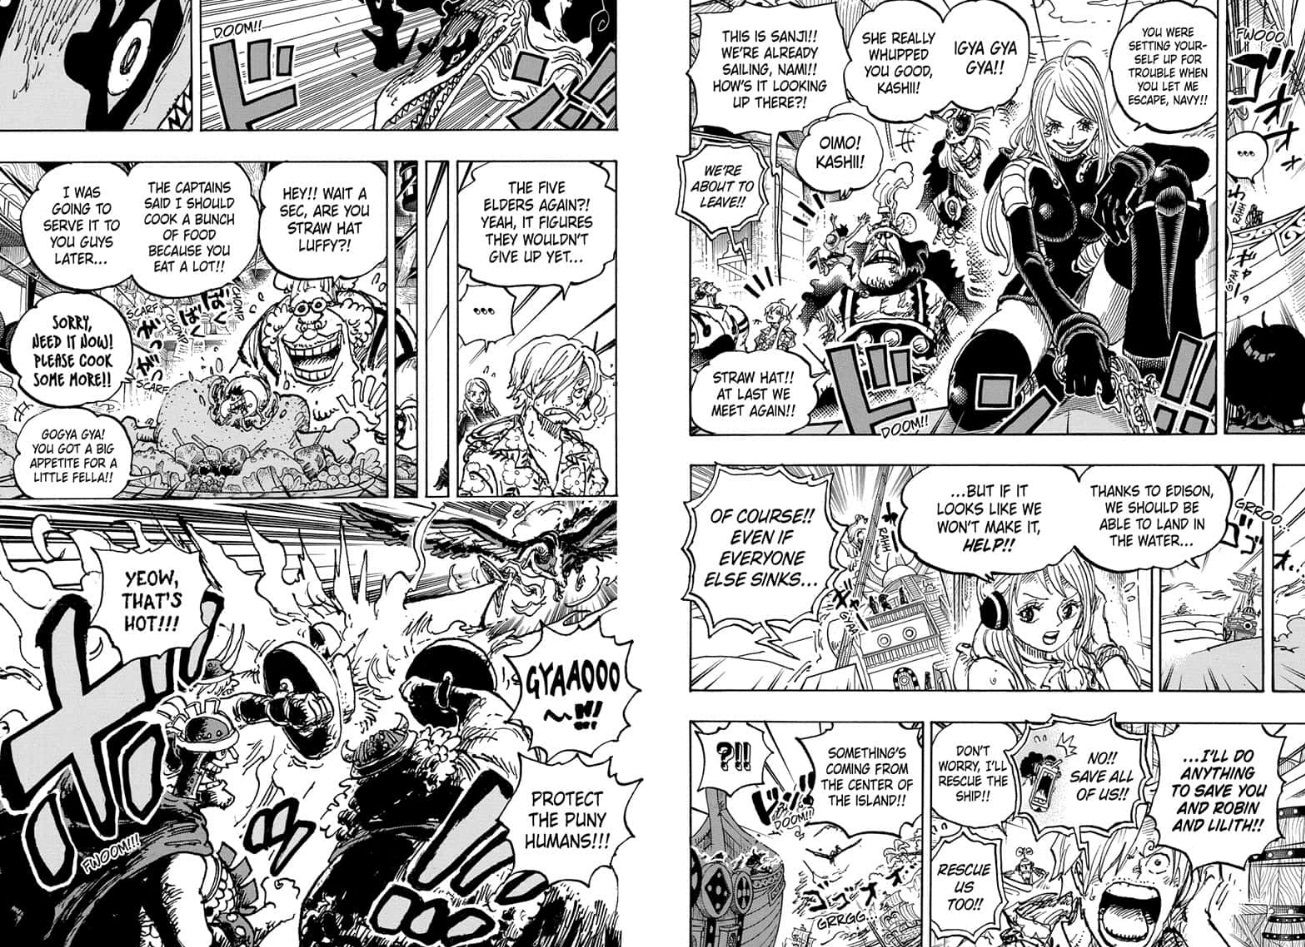 One Piece, Chapter 1118, where the Straw Hats begin to unite.